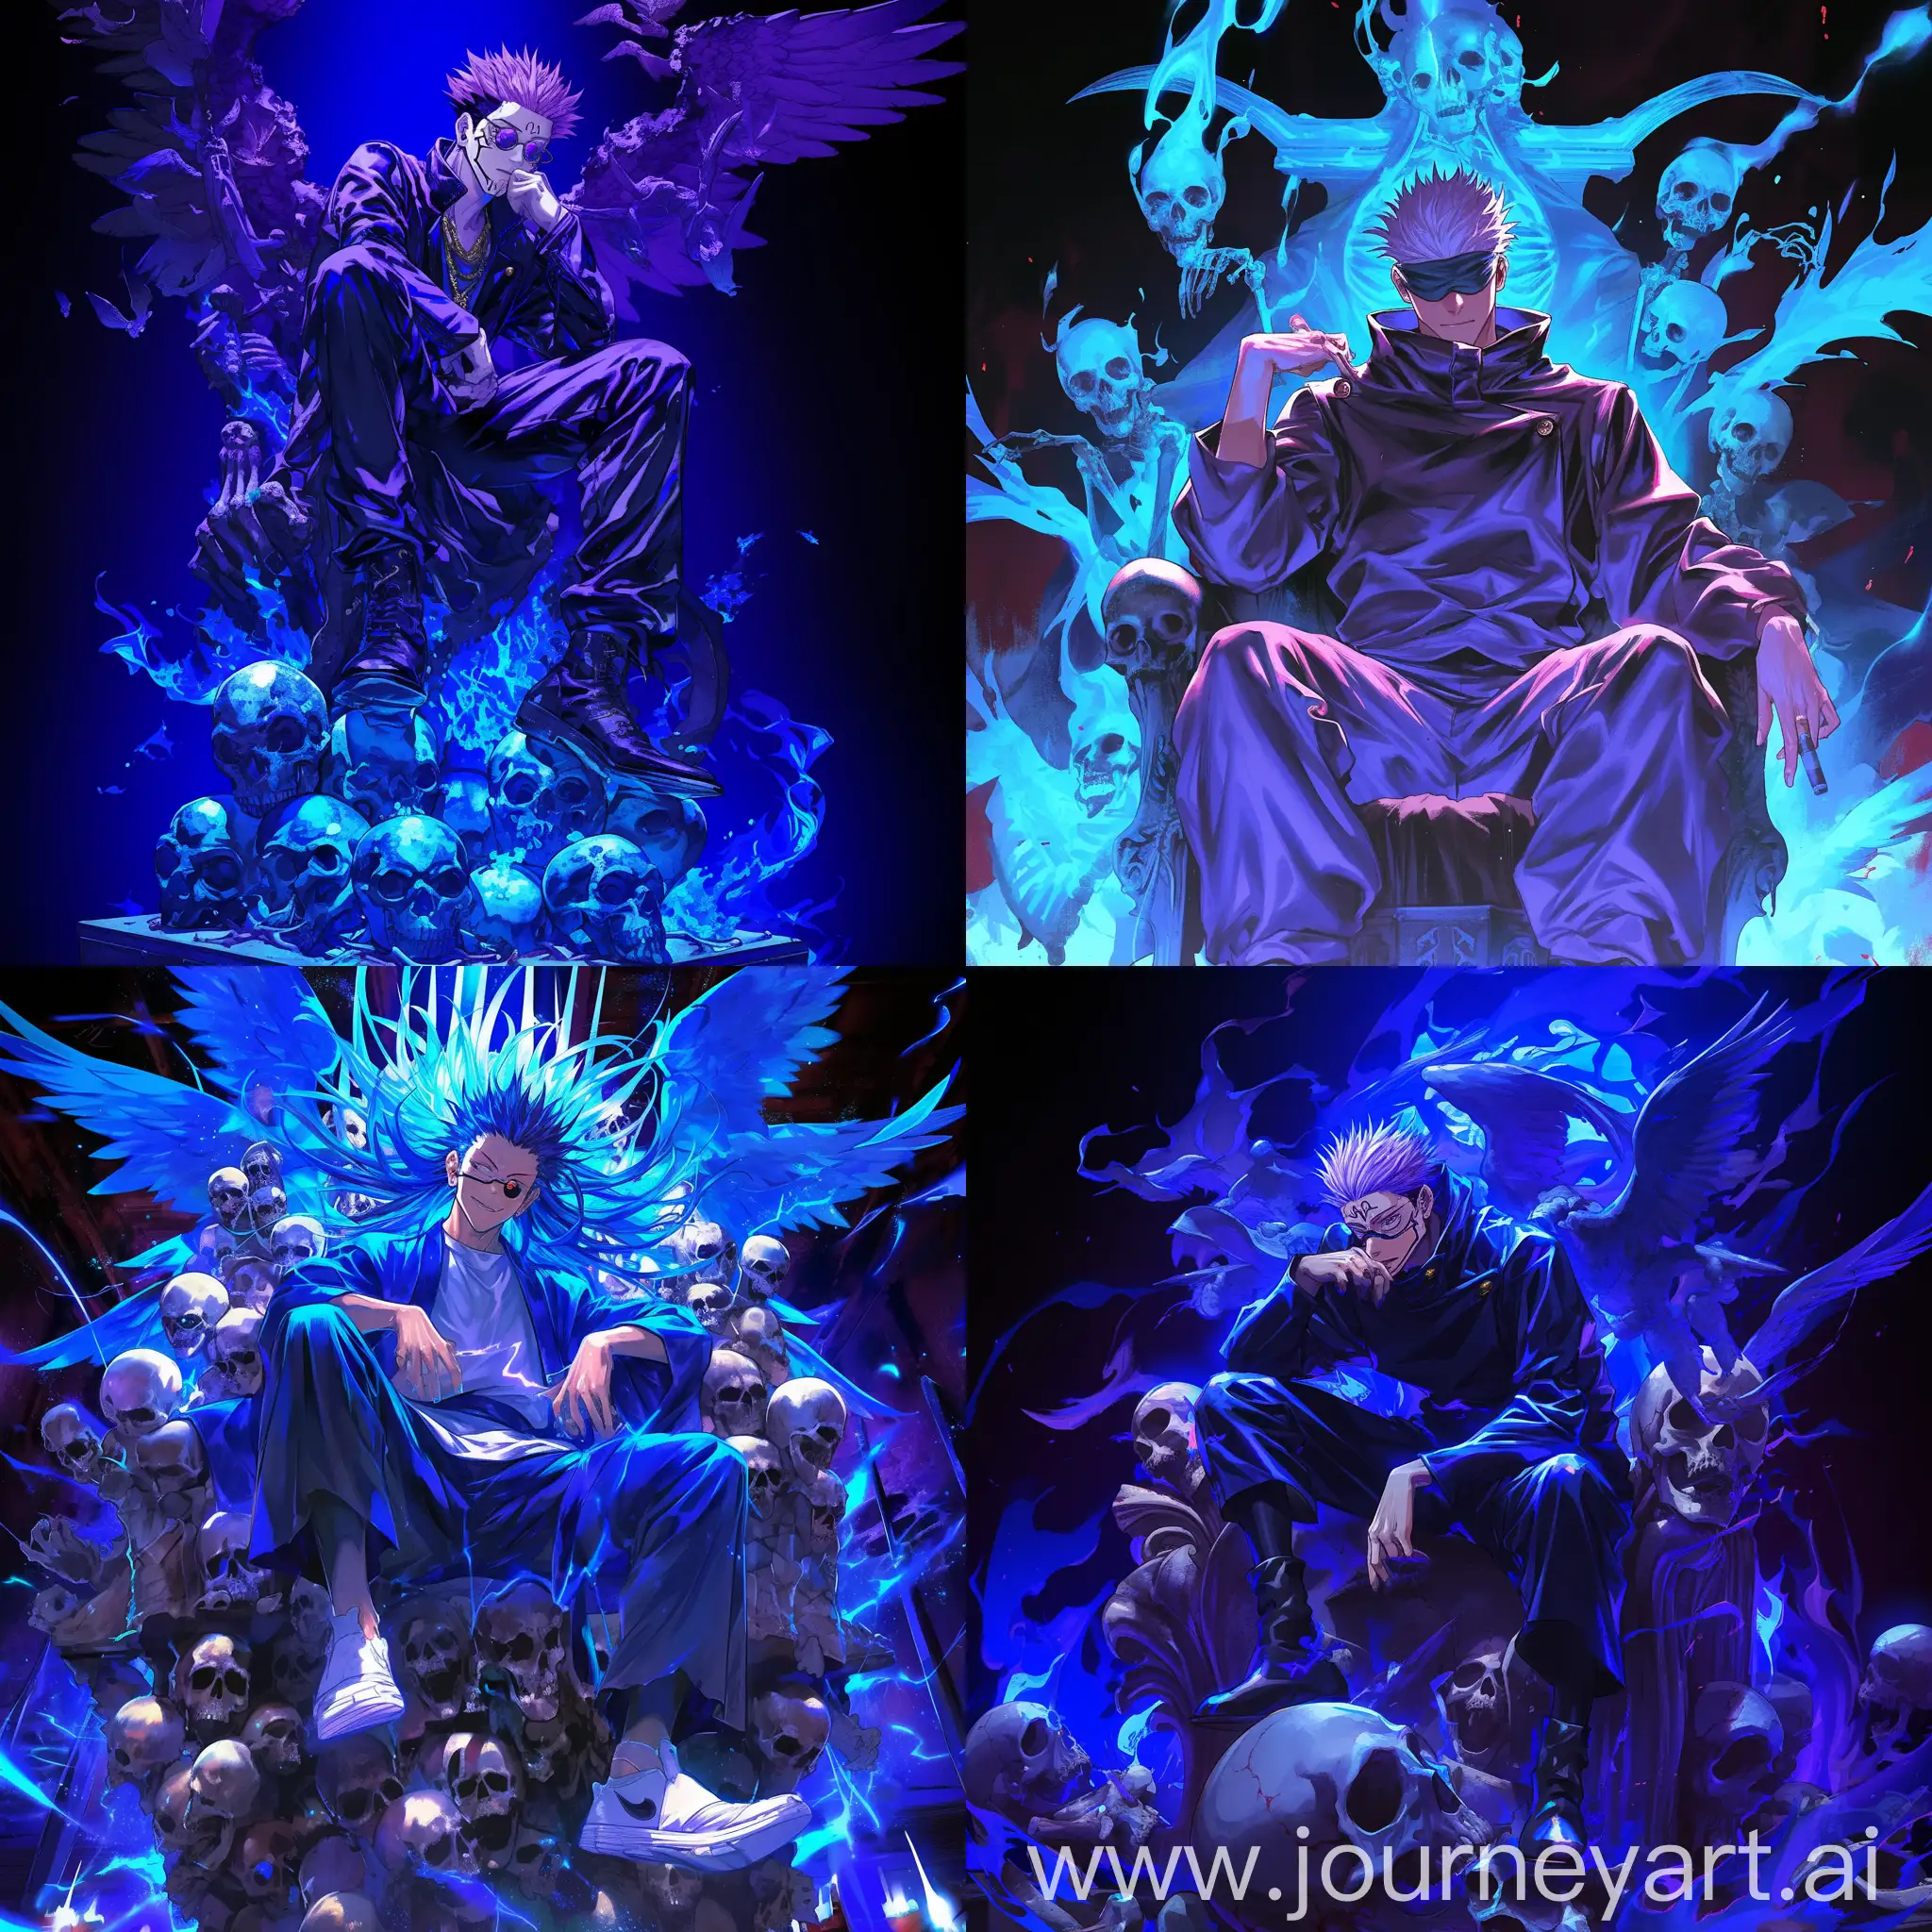 Dynamic-Angels-with-Neon-Blue-Energy-and-Mahoraga-on-Throne-of-Skulls